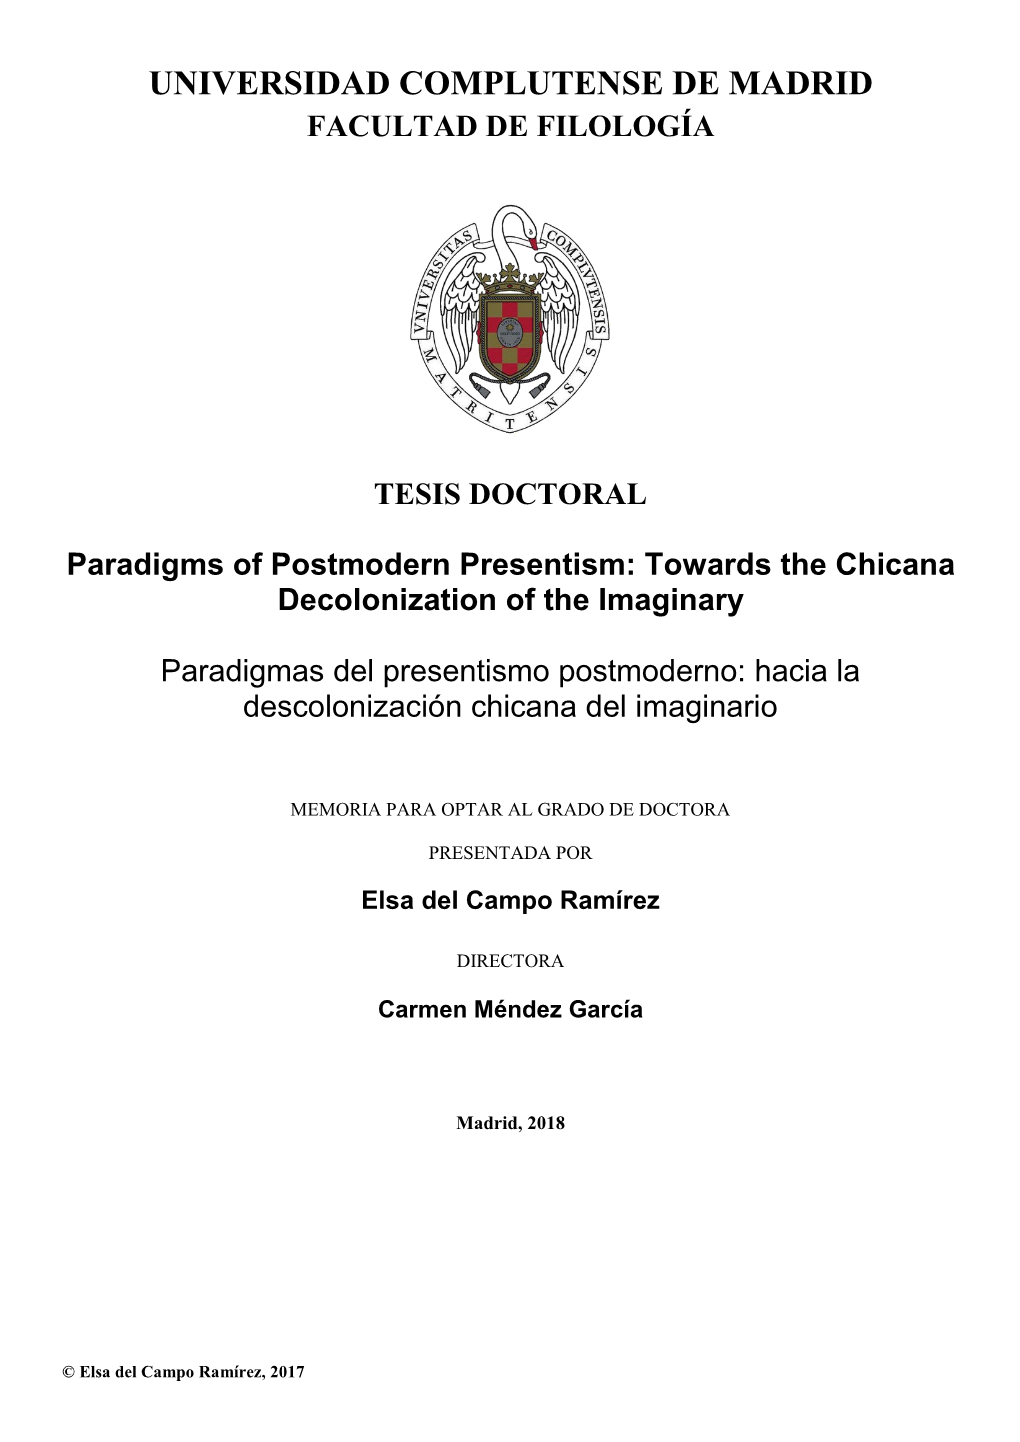 Paradigms of Postmodern Presentism: Towards the Chicana Decolonization of the Imaginary